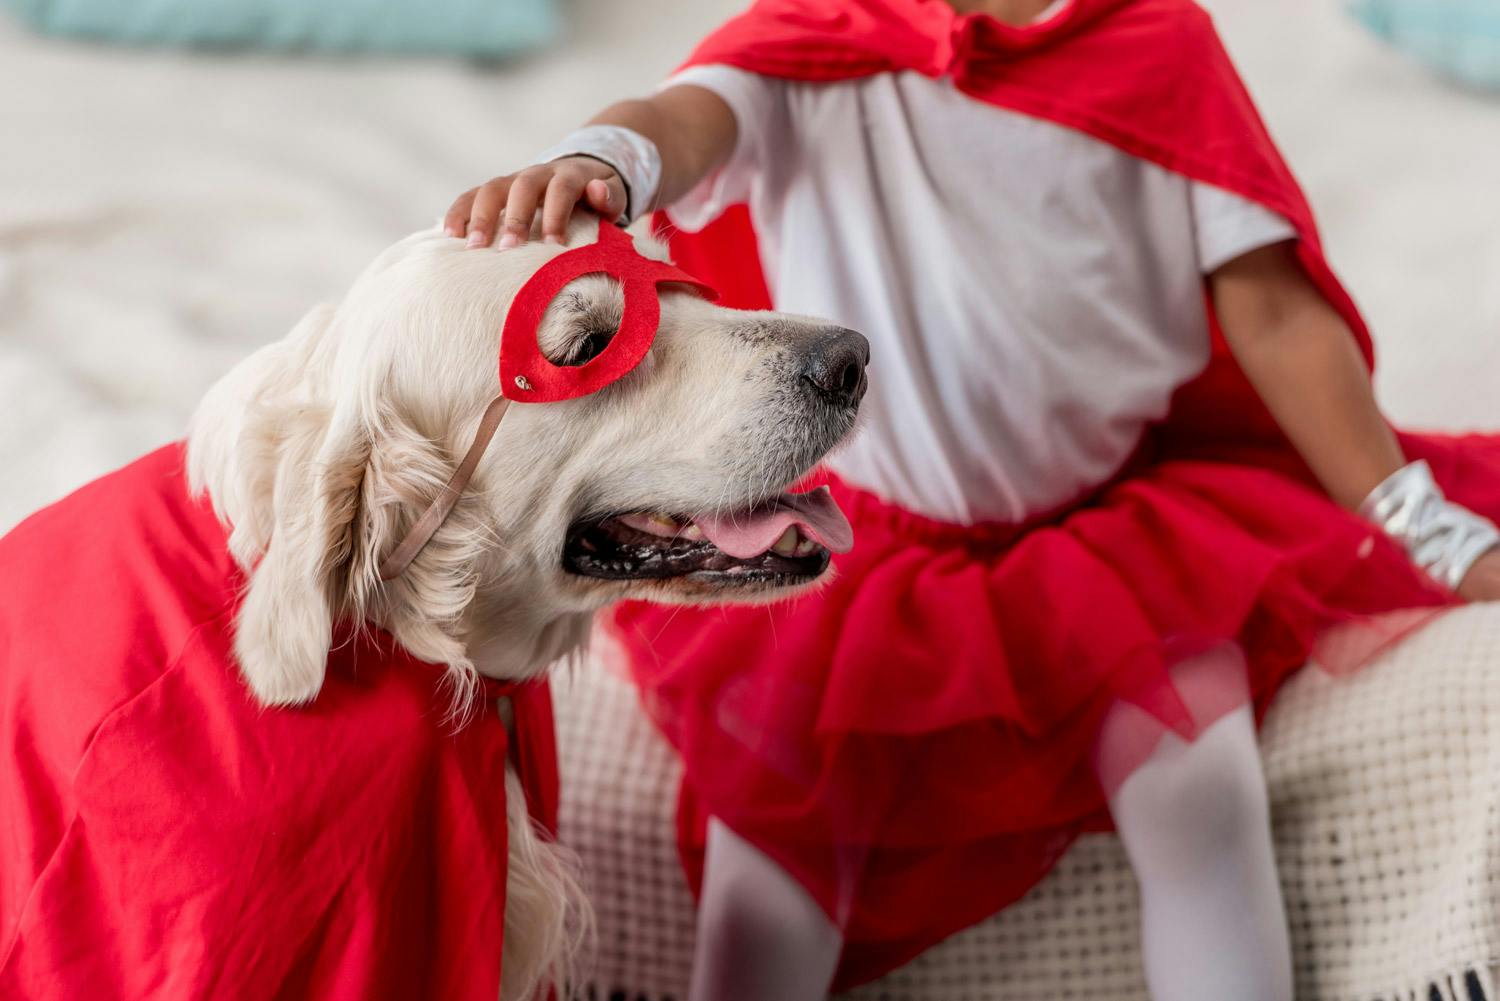 Dog and small child in red superhero costumes